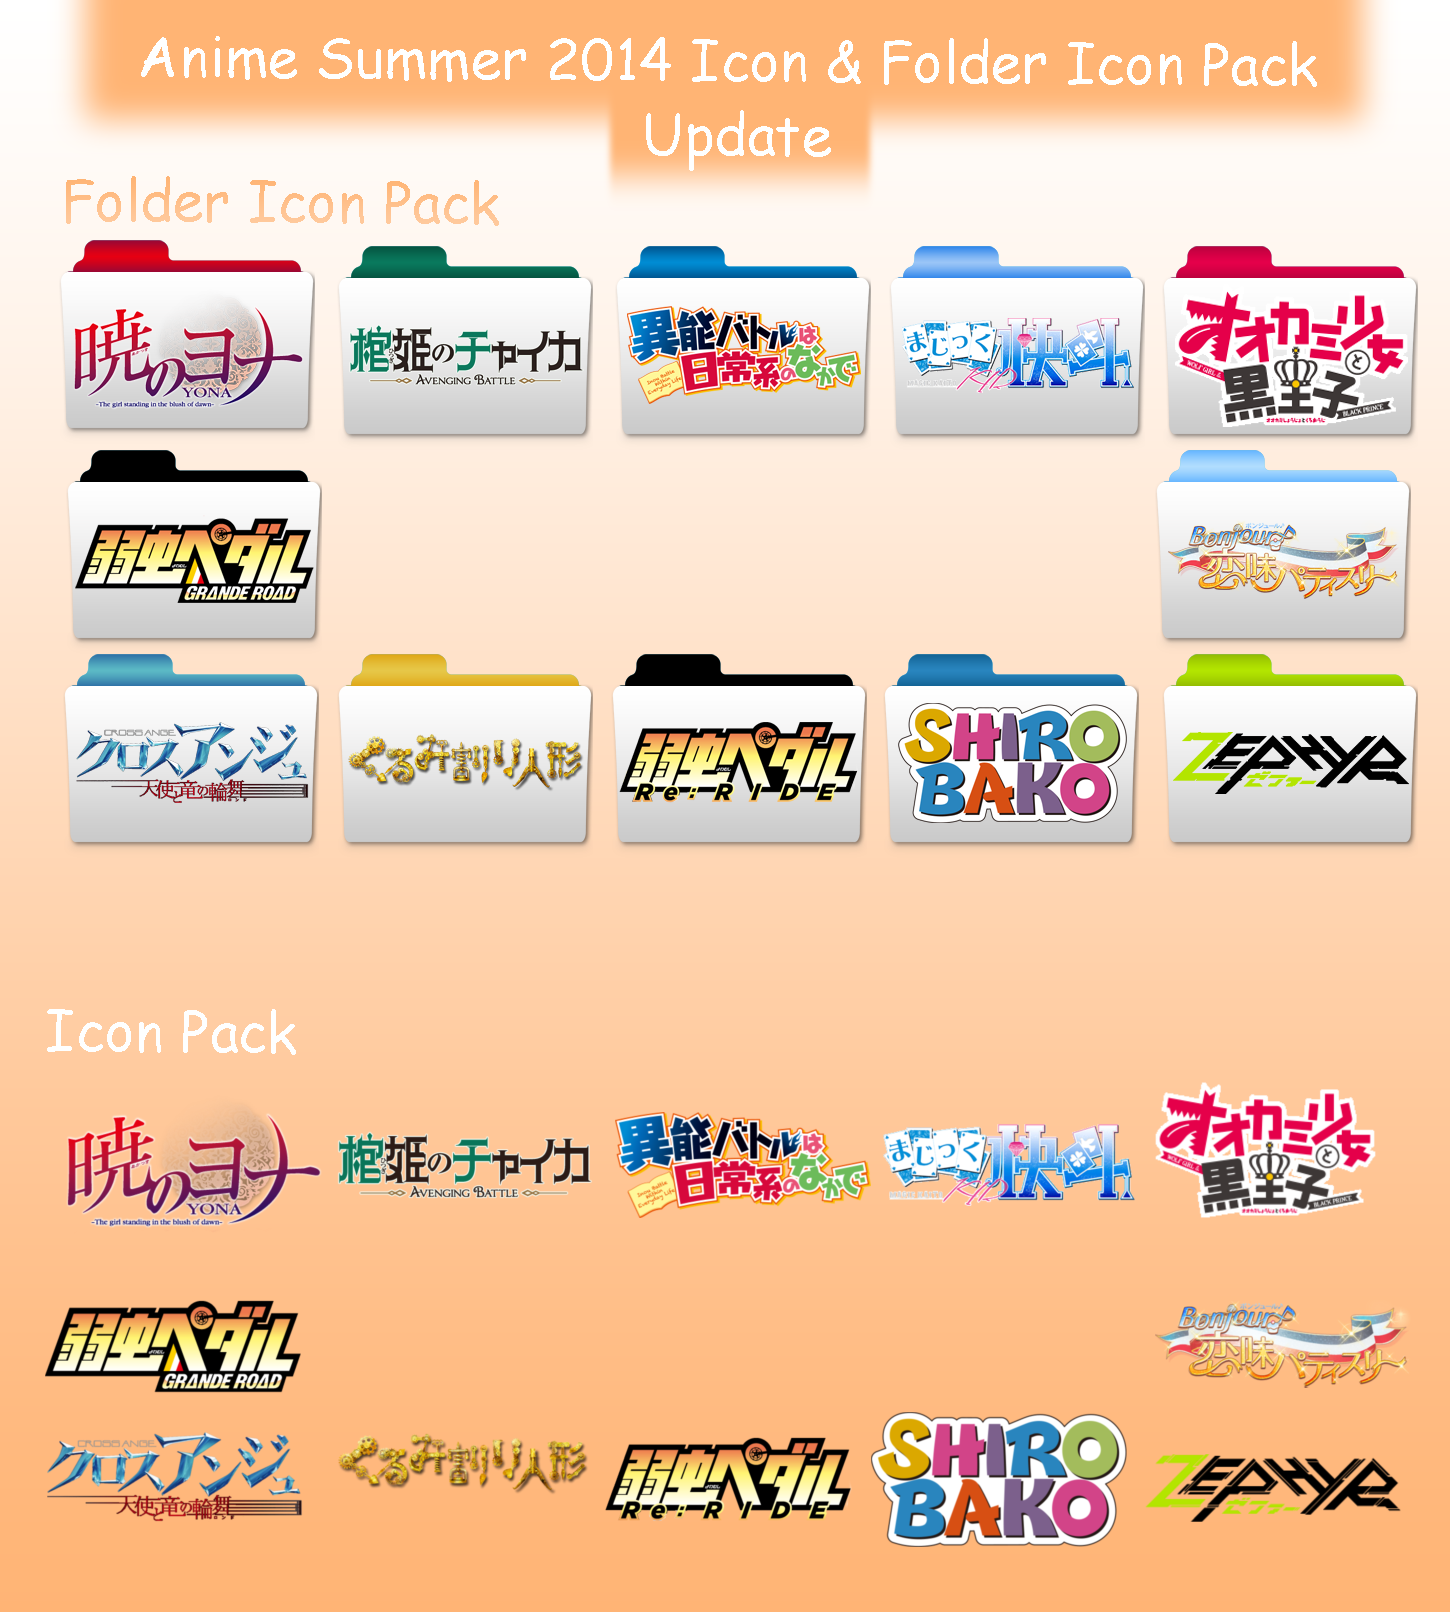 Anime Fall 2014 Icon Folder Icon Pack Update V2 by khairy13 on DeviantArt